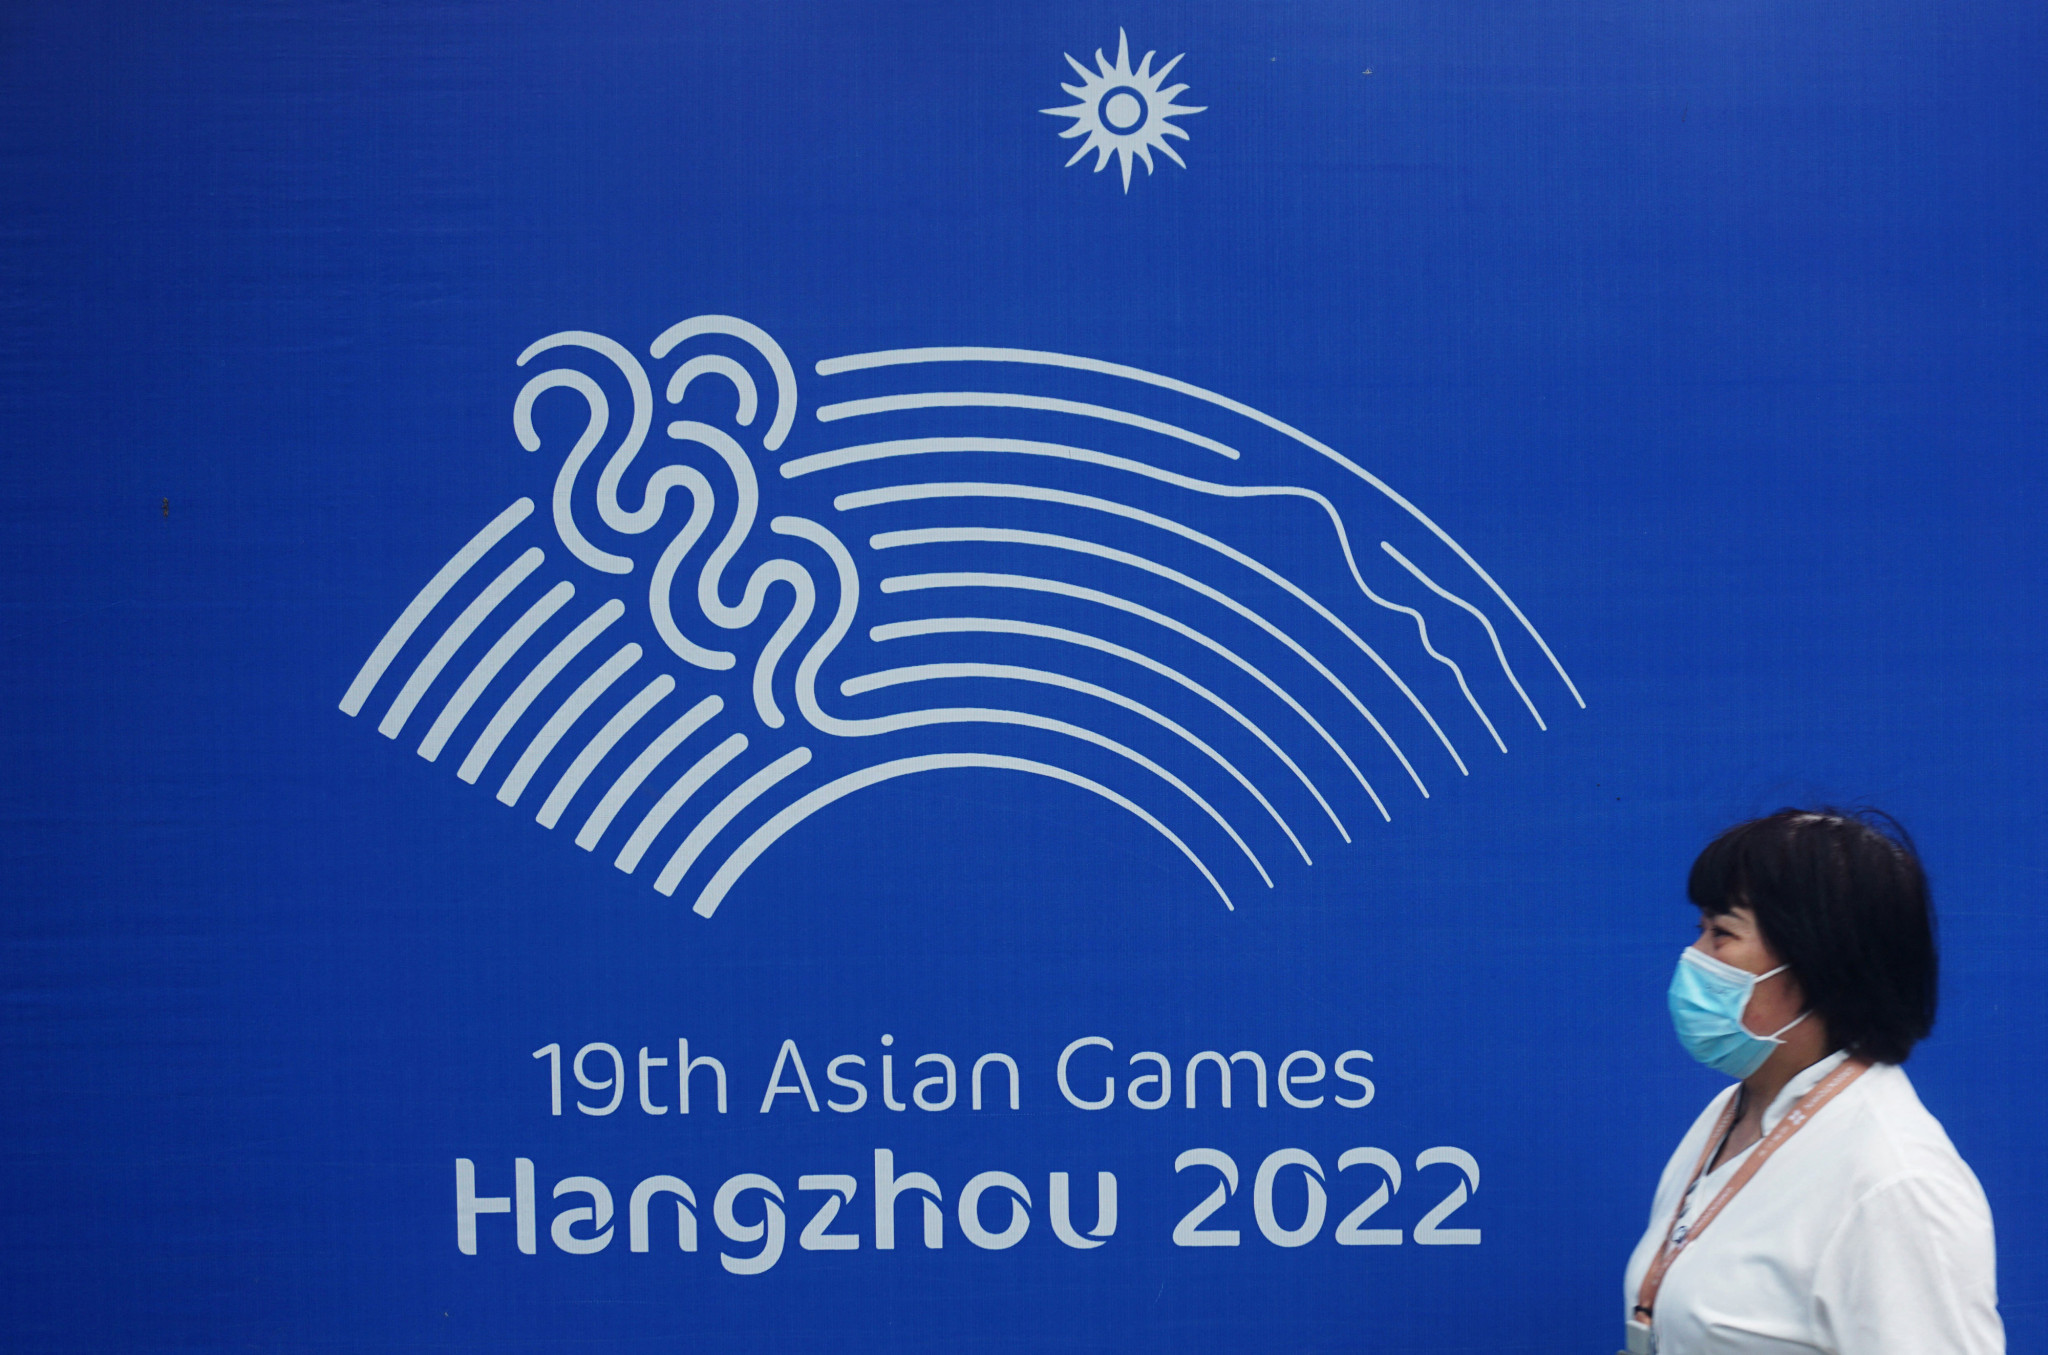 COVID-19 restrictions have seen the Hangzhou 2022 Asian Games delayed until 2023 ©Getty Images